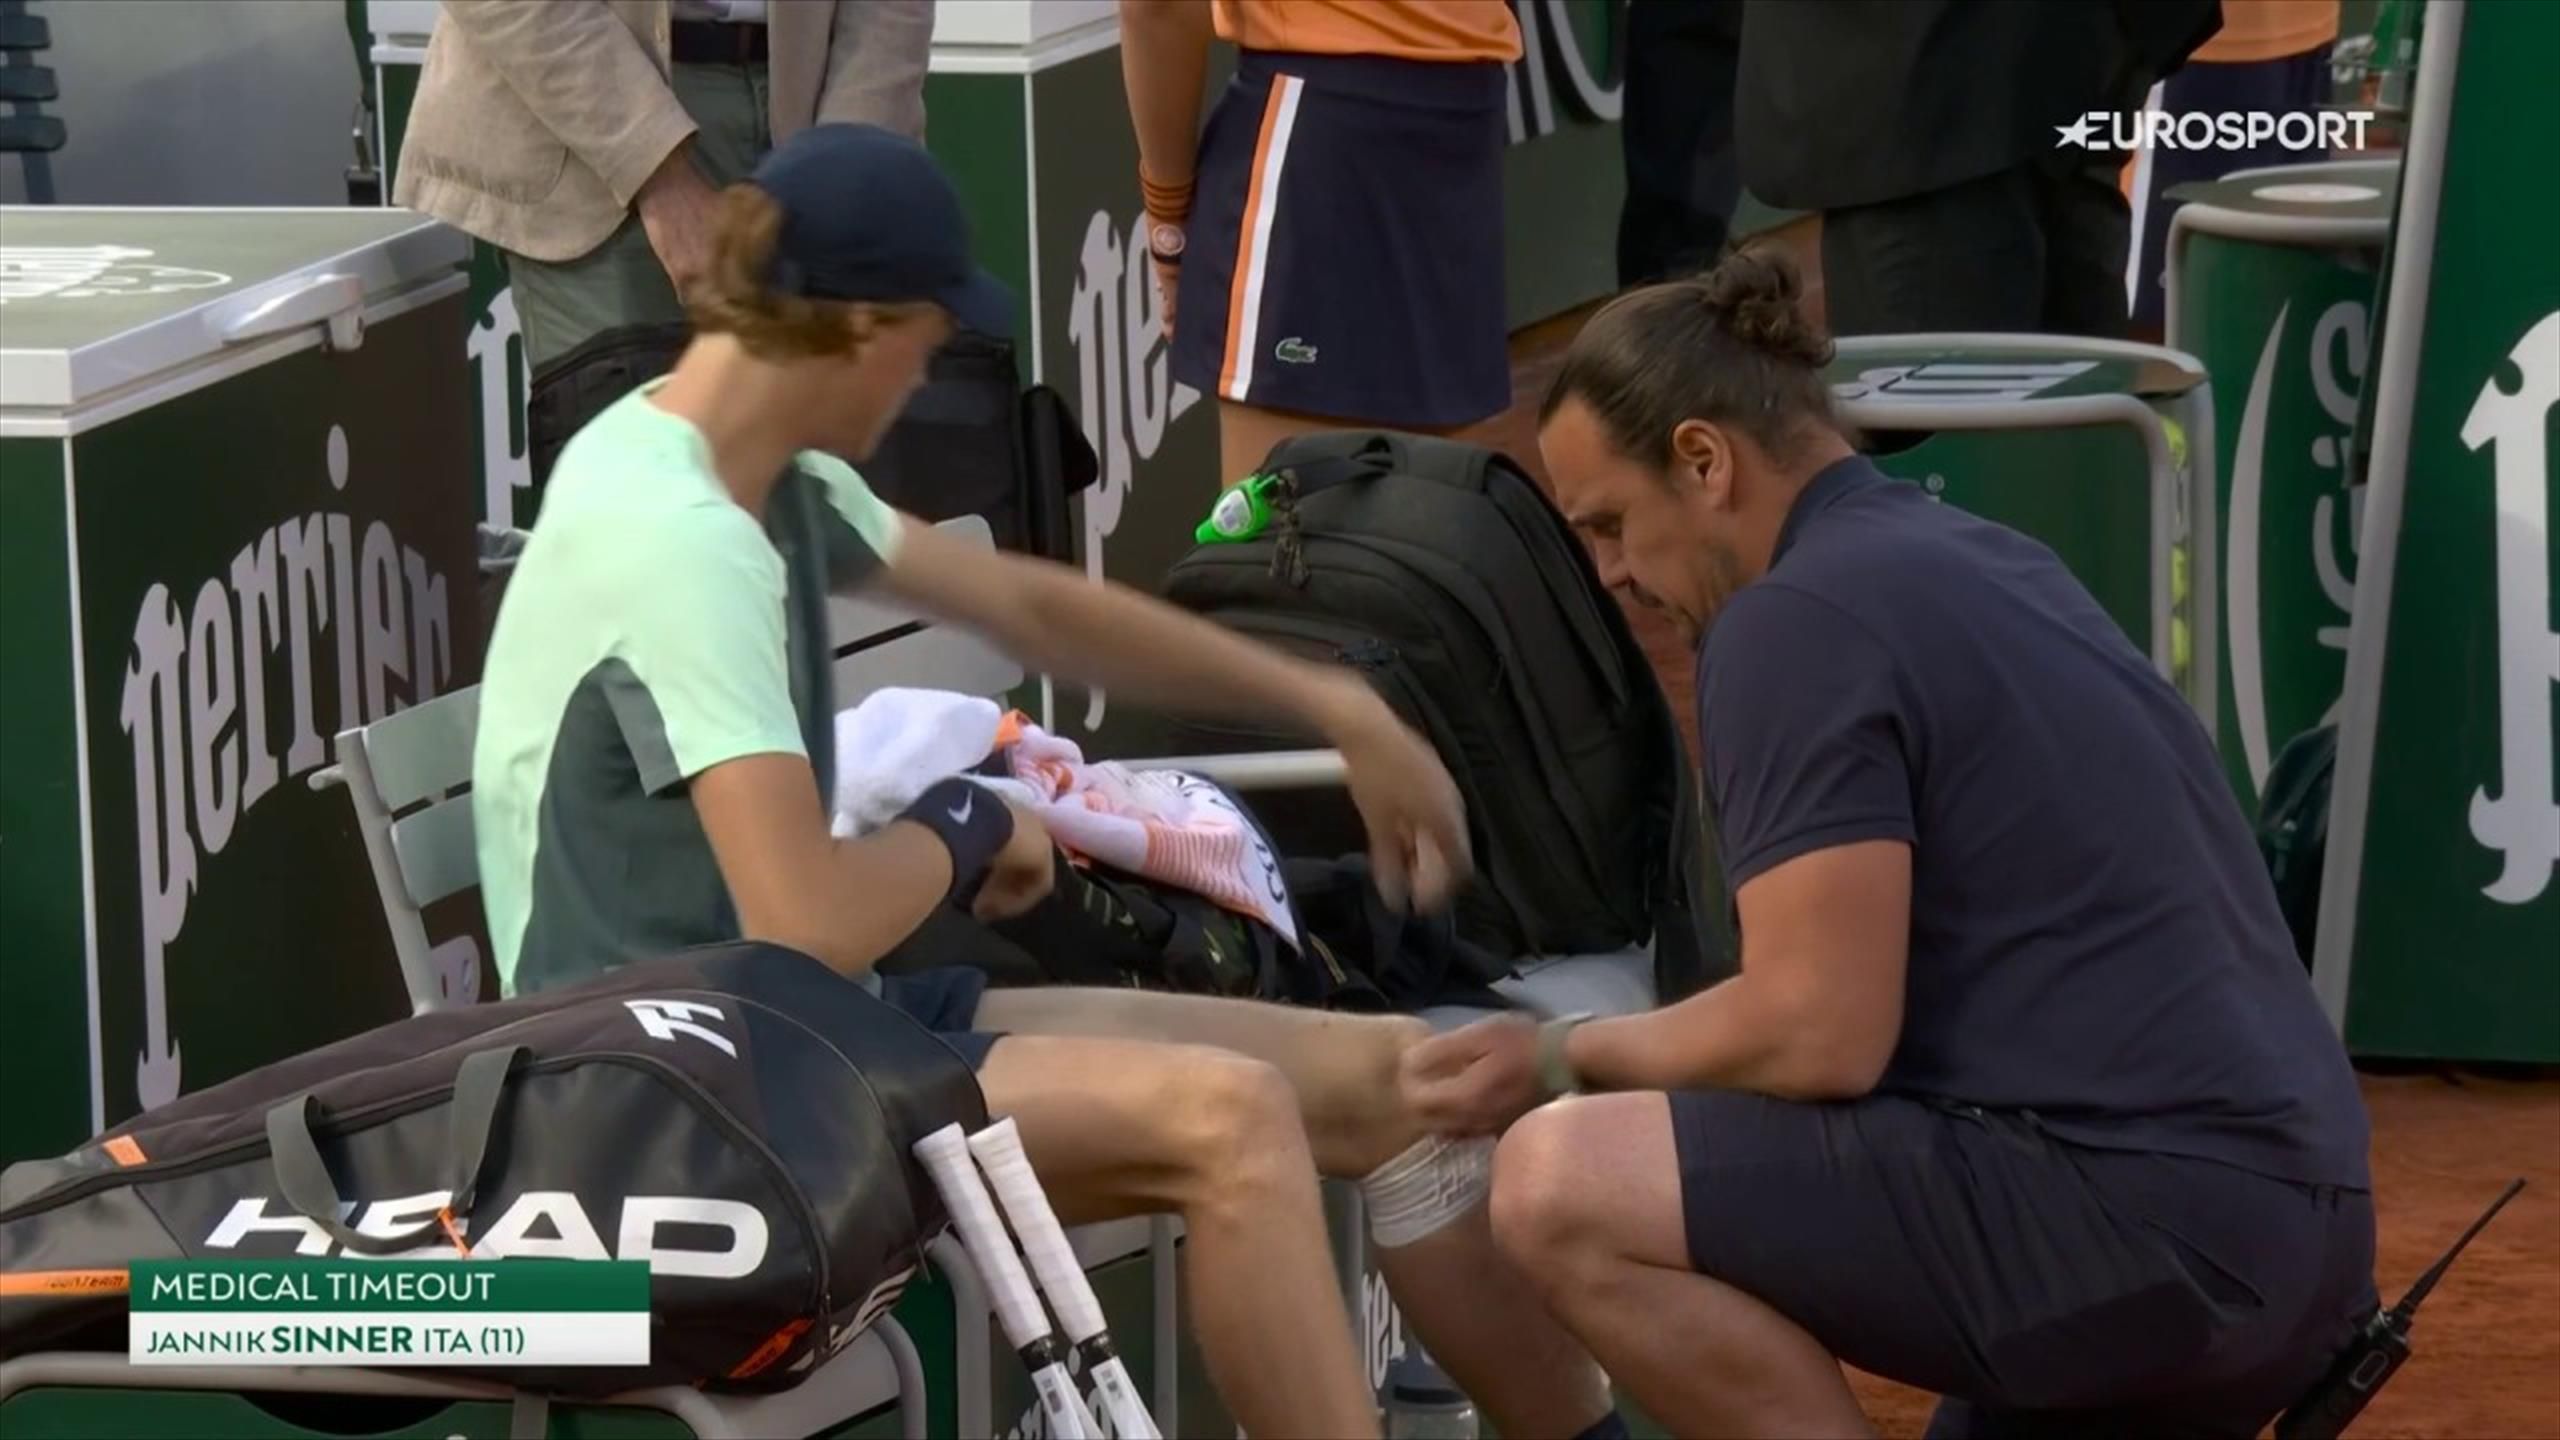 Alarm for Jannik Sinner as Italian takes medical timeout over knee injury against Andrey Rublev at French Open - Tennis video